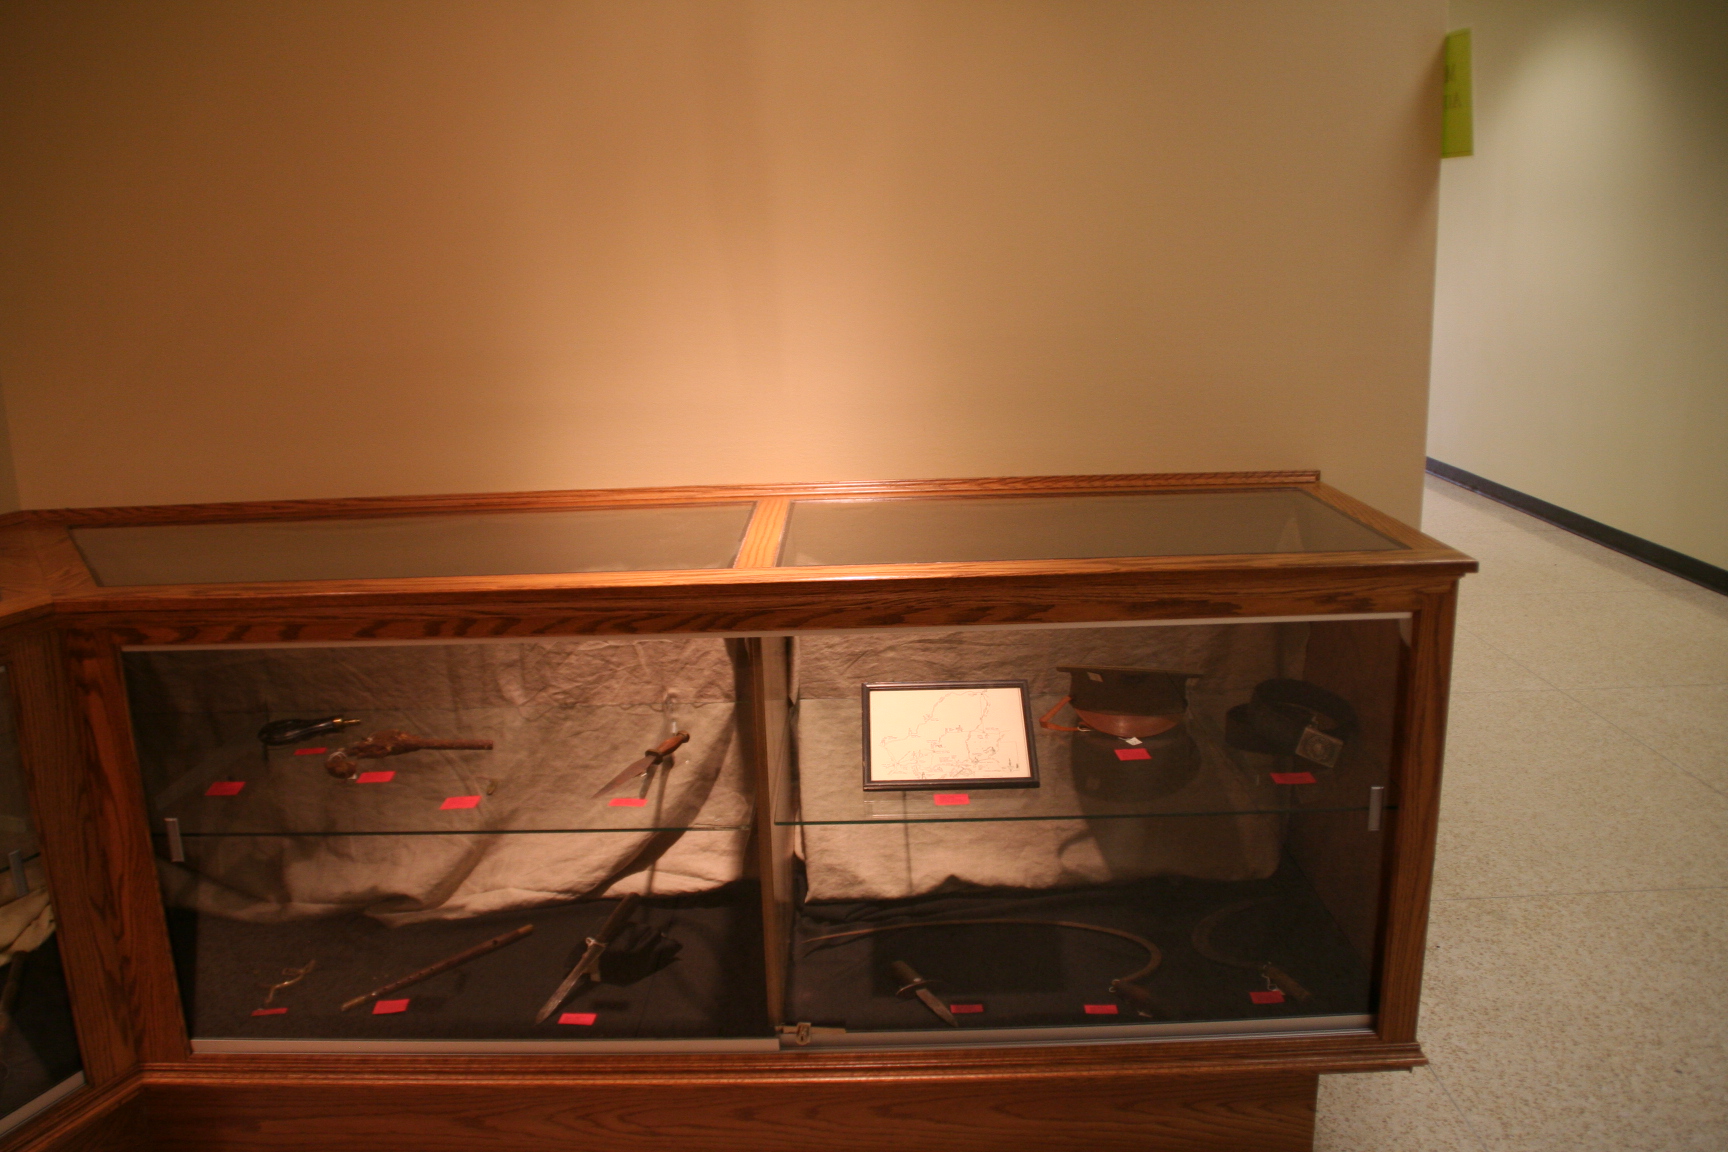 A glass case lined with red velvet, filled with guns and knives of various sorts.